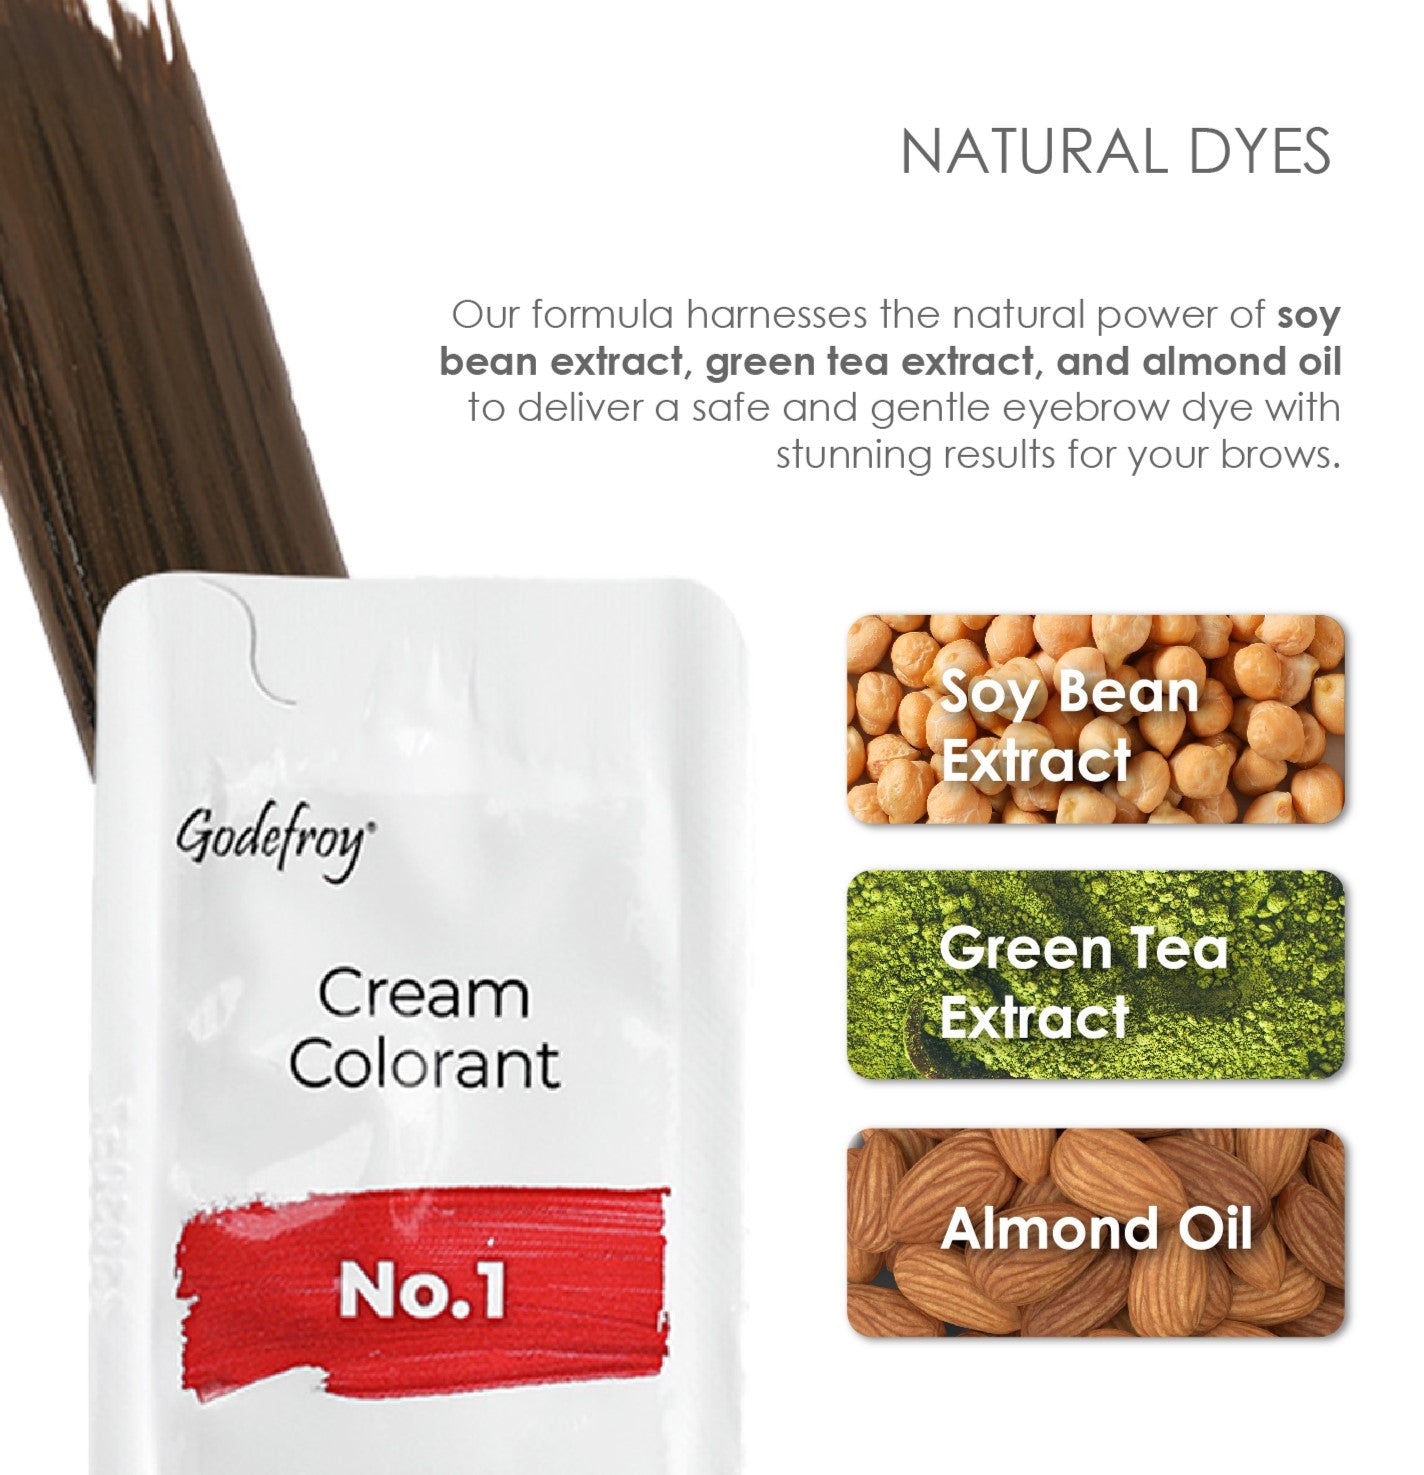 cream colorant natural dye plant ingredients